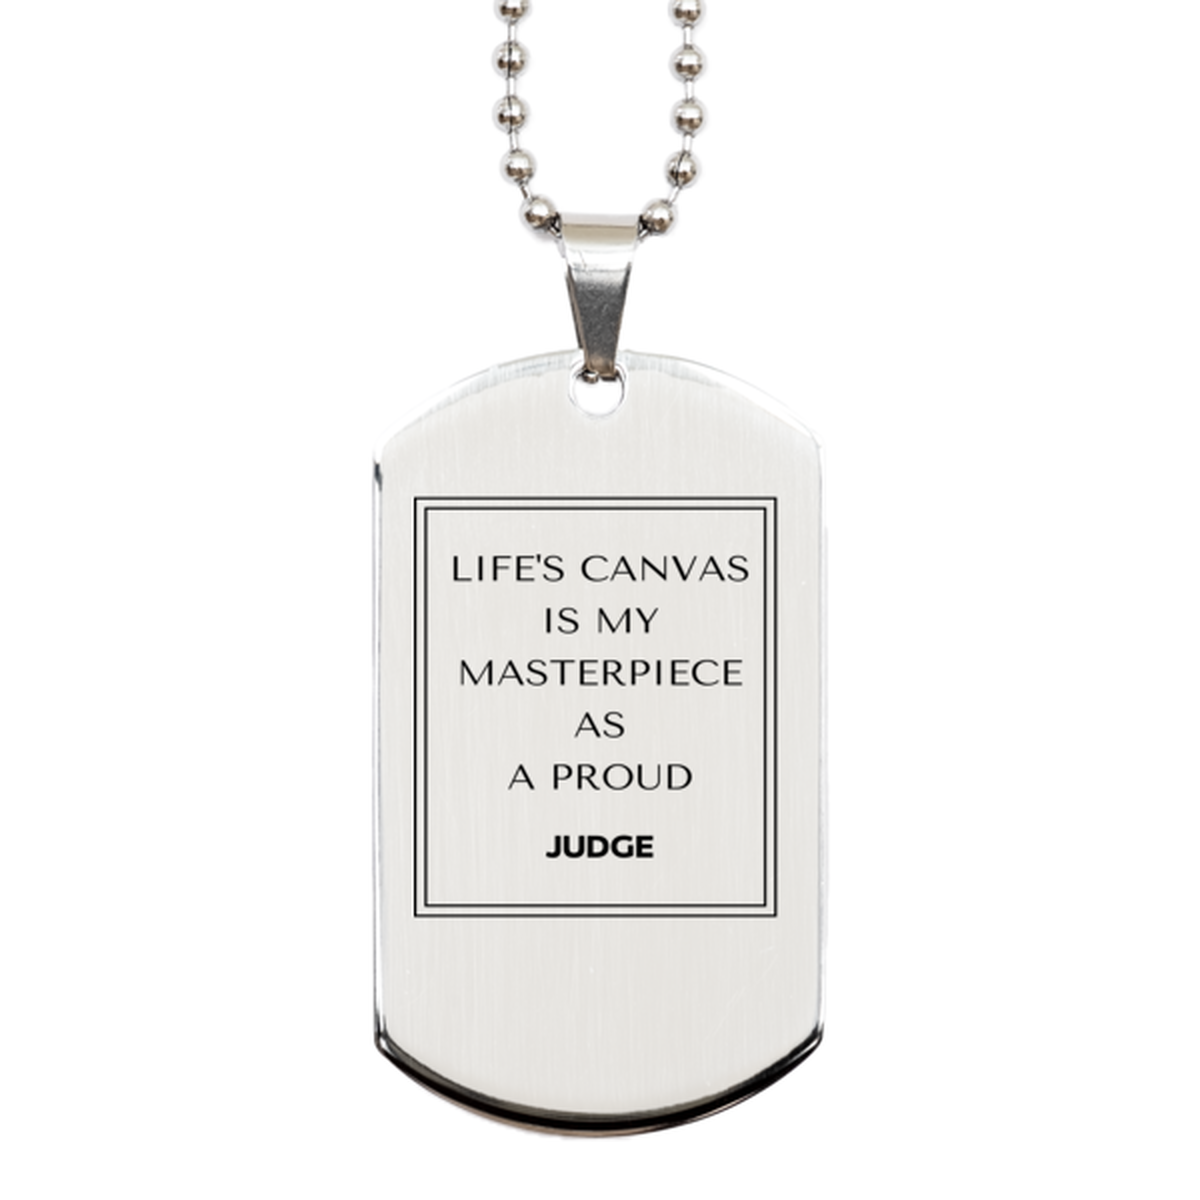 Proud Judge Gifts, Life's canvas is my masterpiece, Epic Birthday Christmas Unique Silver Dog Tag For Judge, Coworkers, Men, Women, Friends